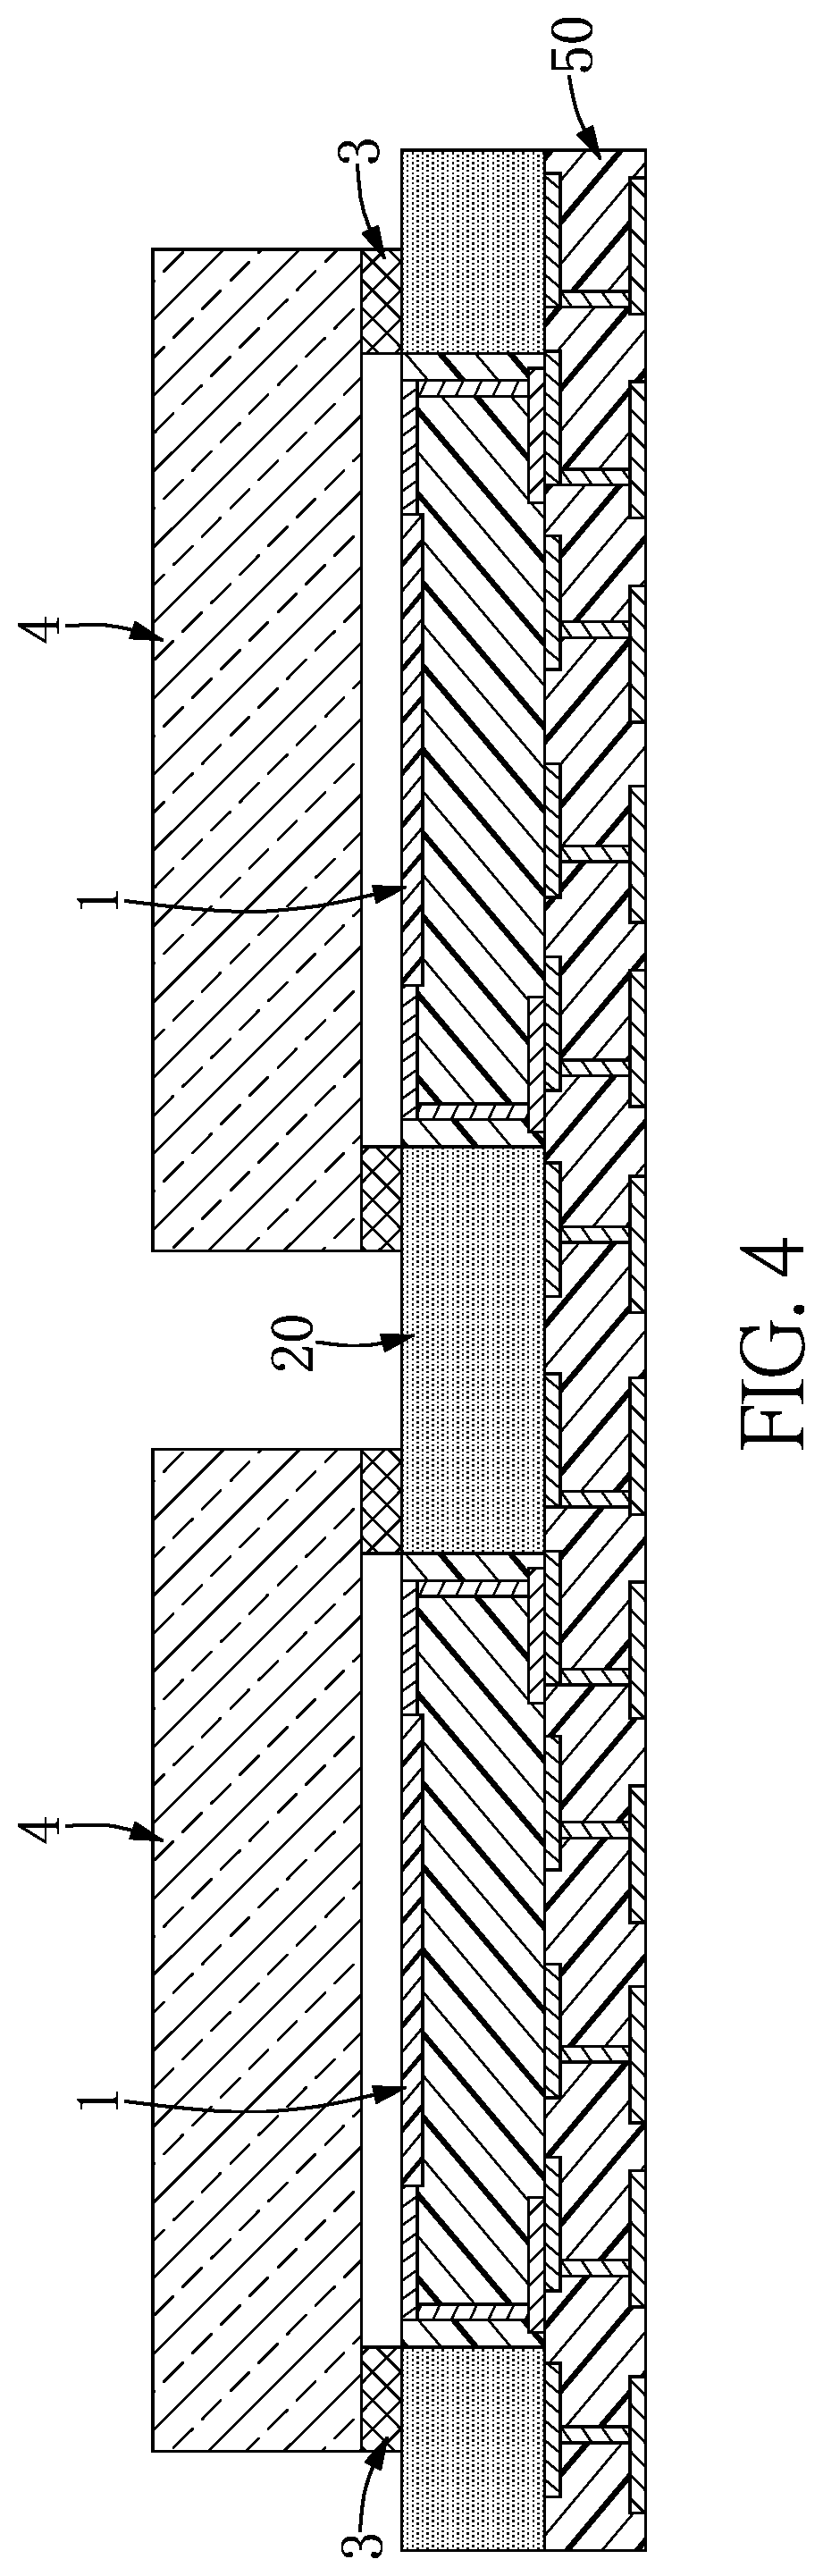 Chip-scale sensor package structure